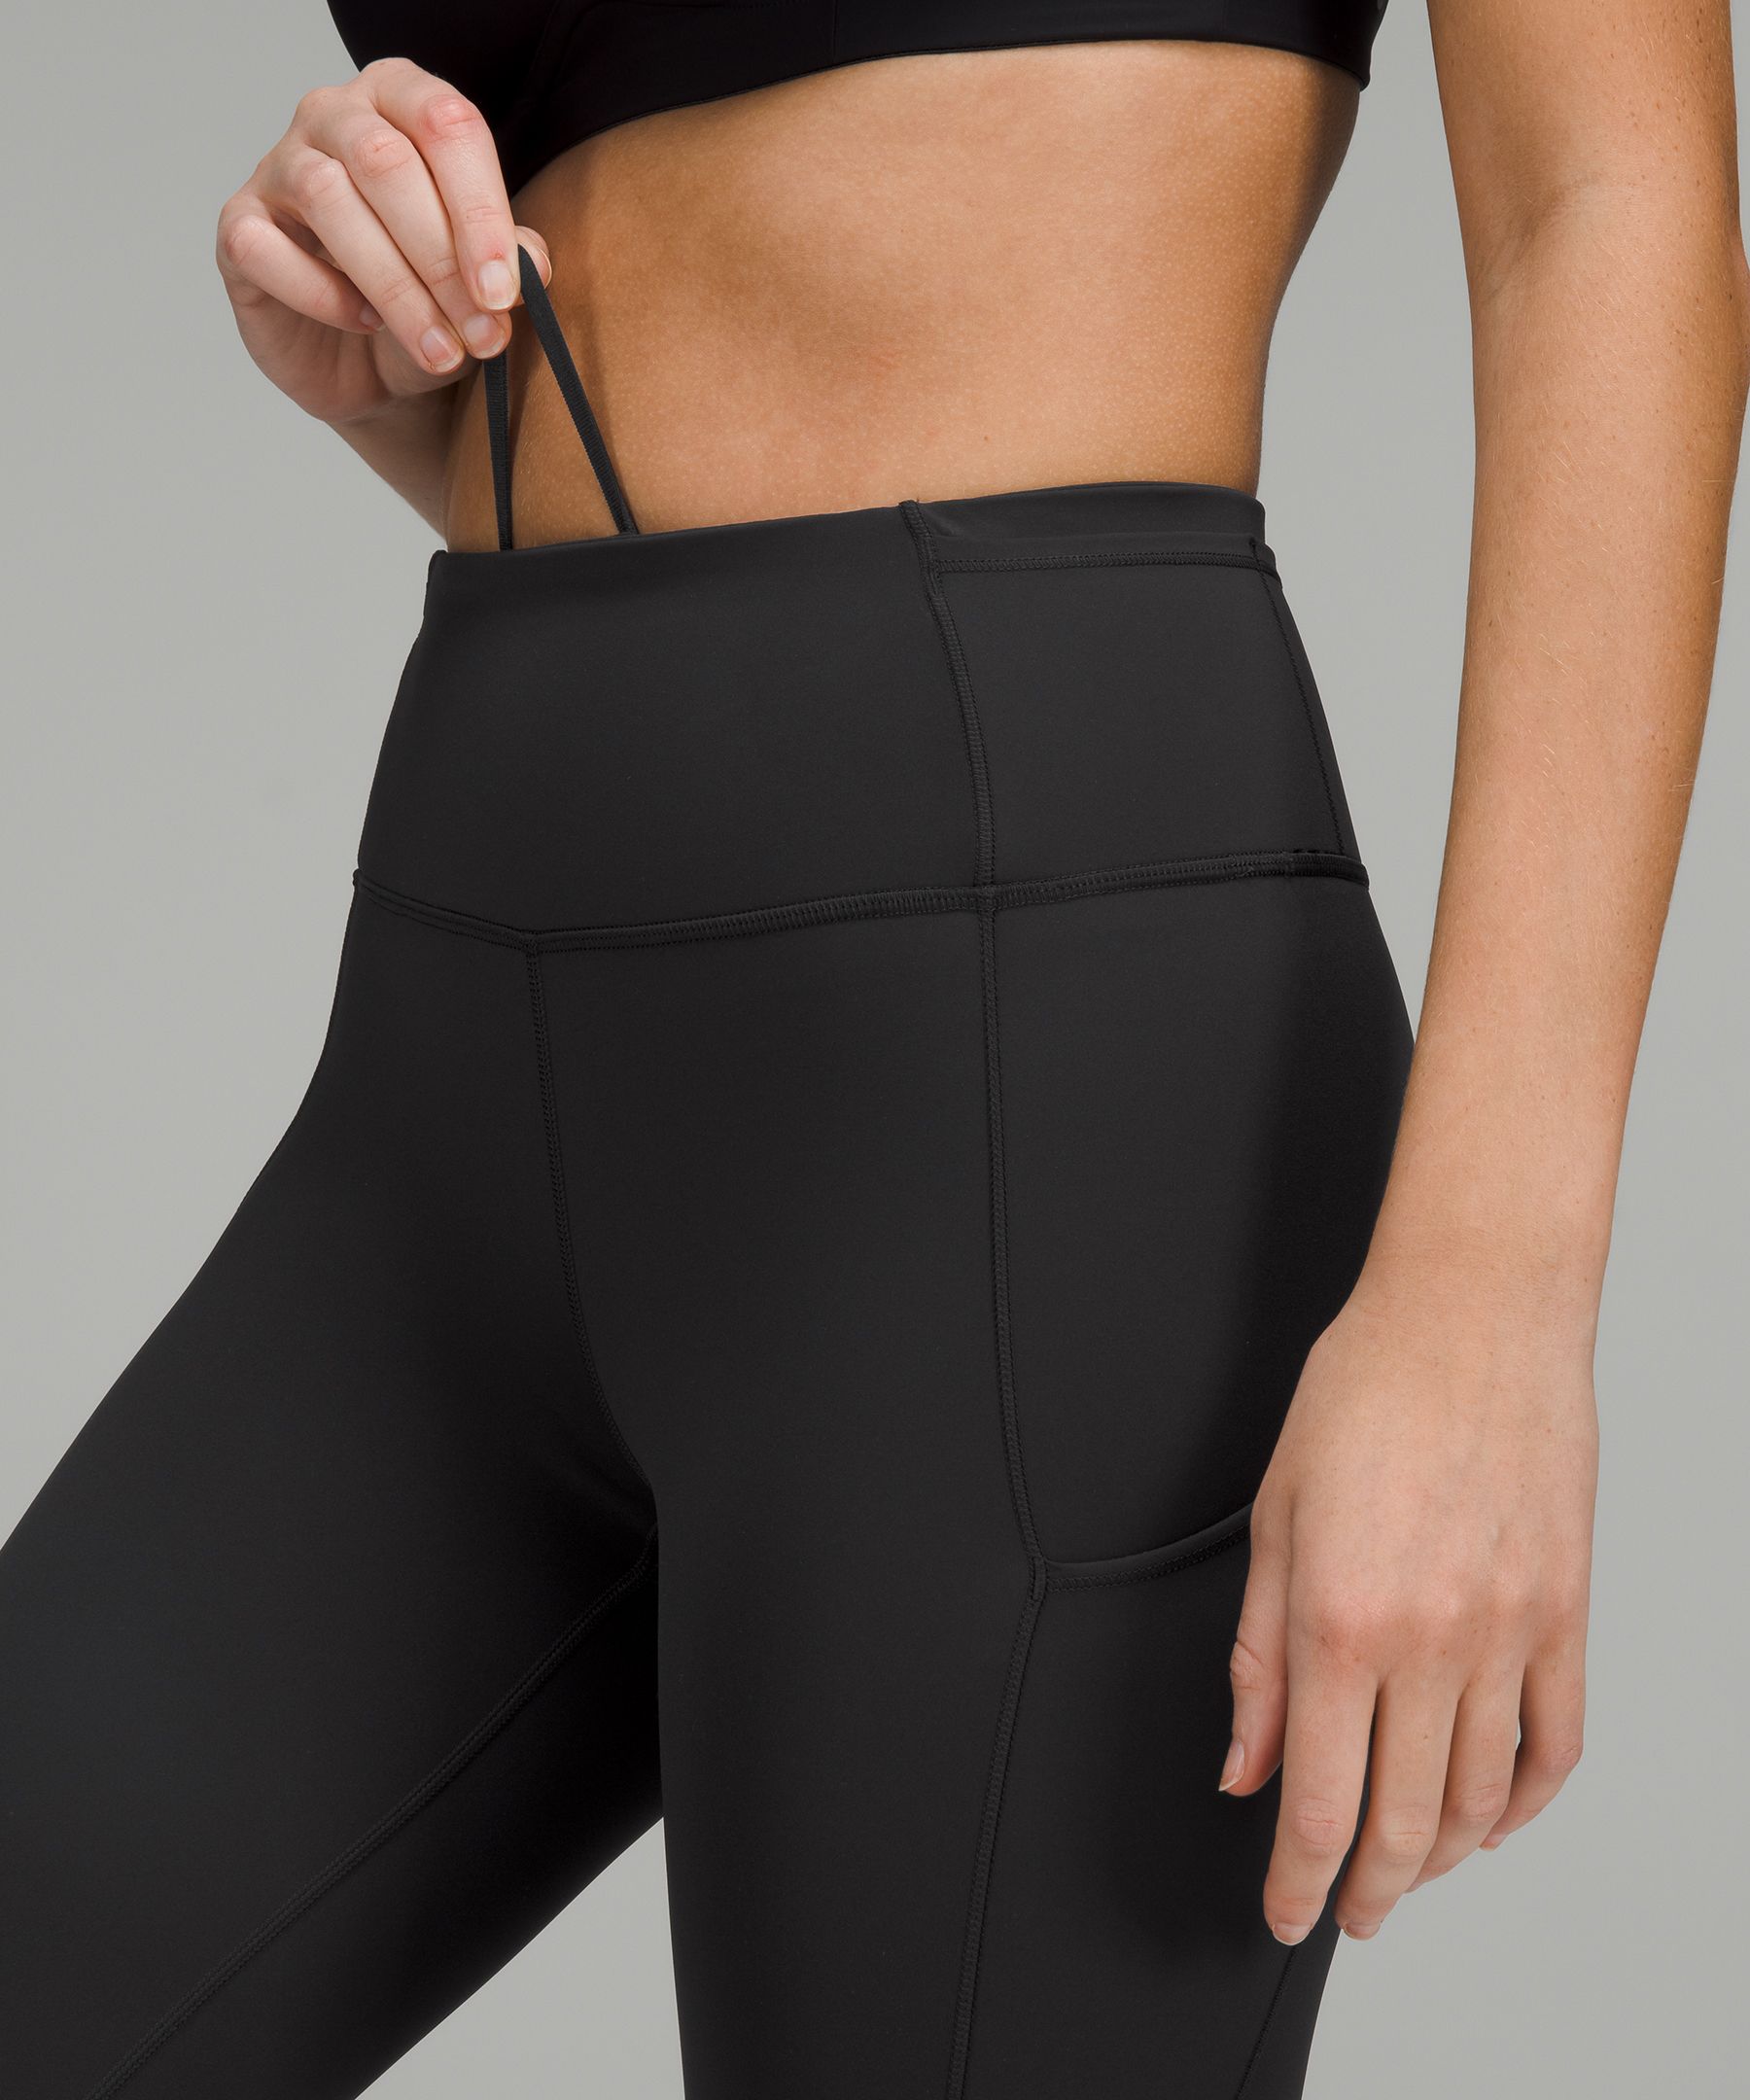 Lululemon Fast and Free 25” size 6 Reflective  Leggings are not pants,  Pants for women, Clothes design